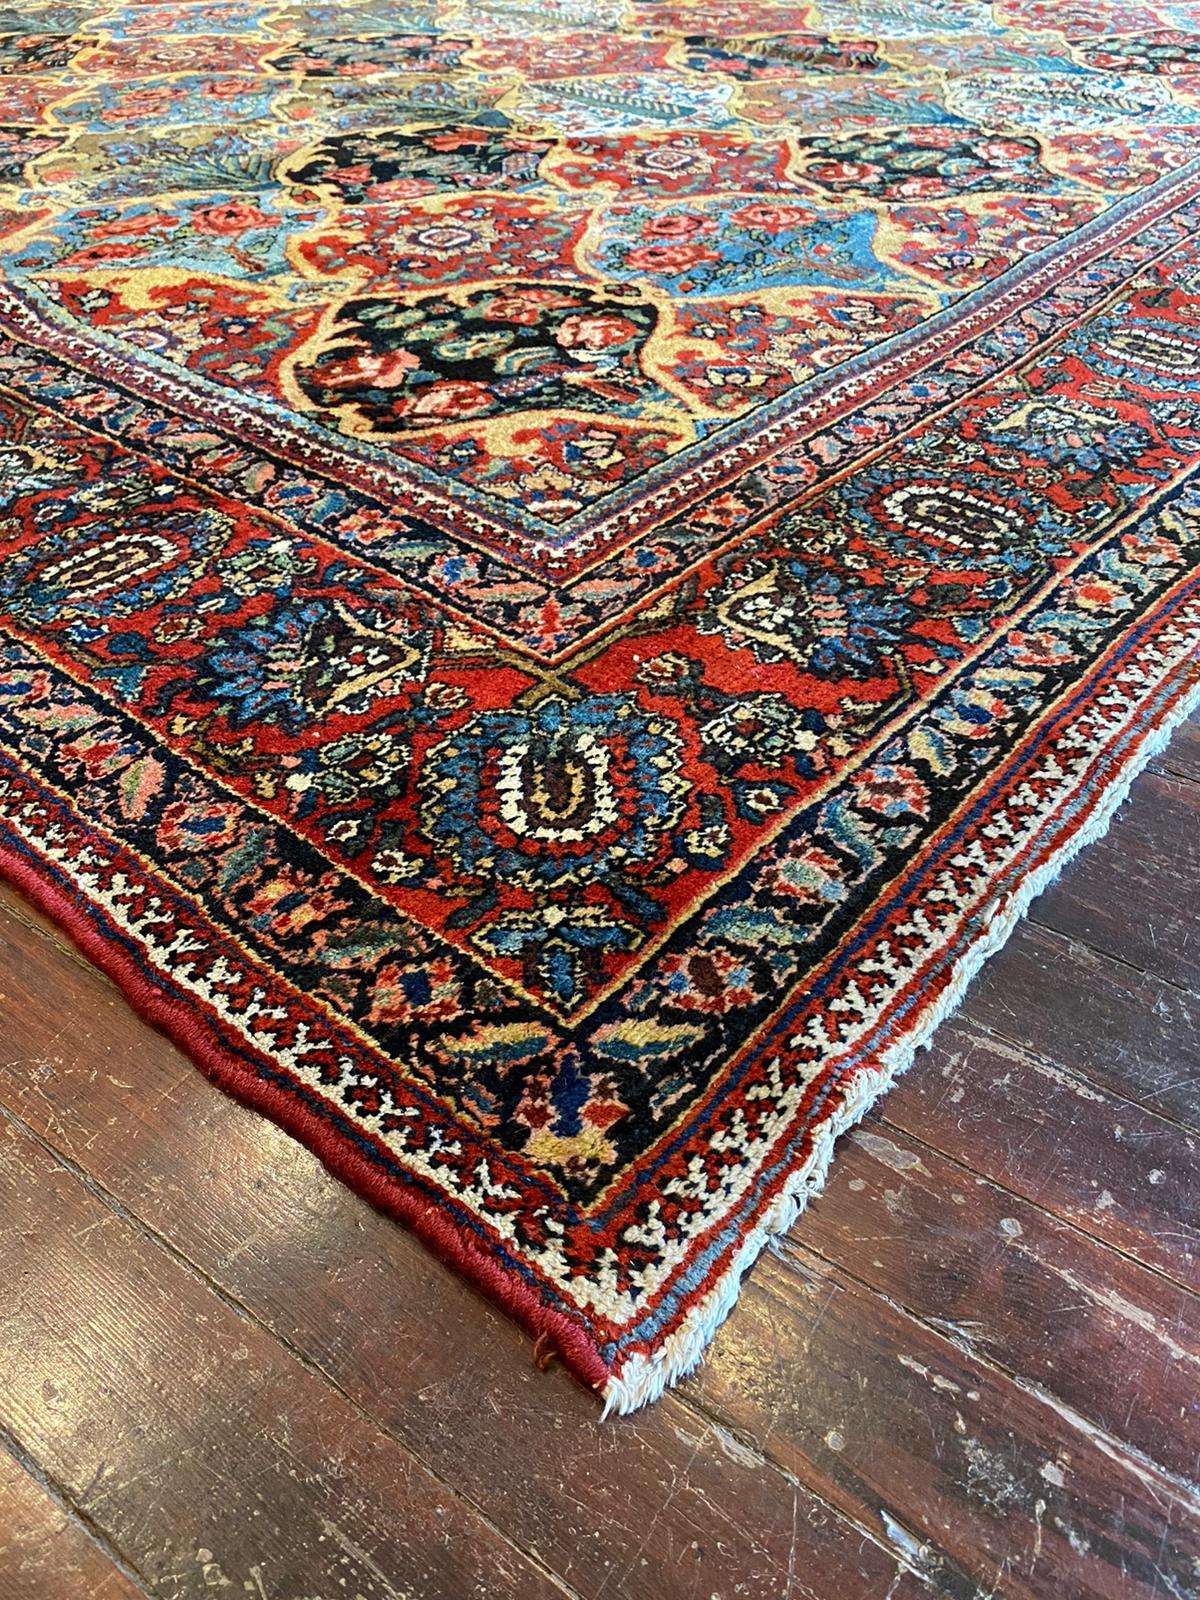 The Vintage Bakhtiyar Rug is a true masterpiece that exudes timeless charm and beauty. Its color palette, adorned with deep browns, rich reds, warm tans, calming blues, regal gold, creamy hues, and delicate rose accents, creates a stunning array of